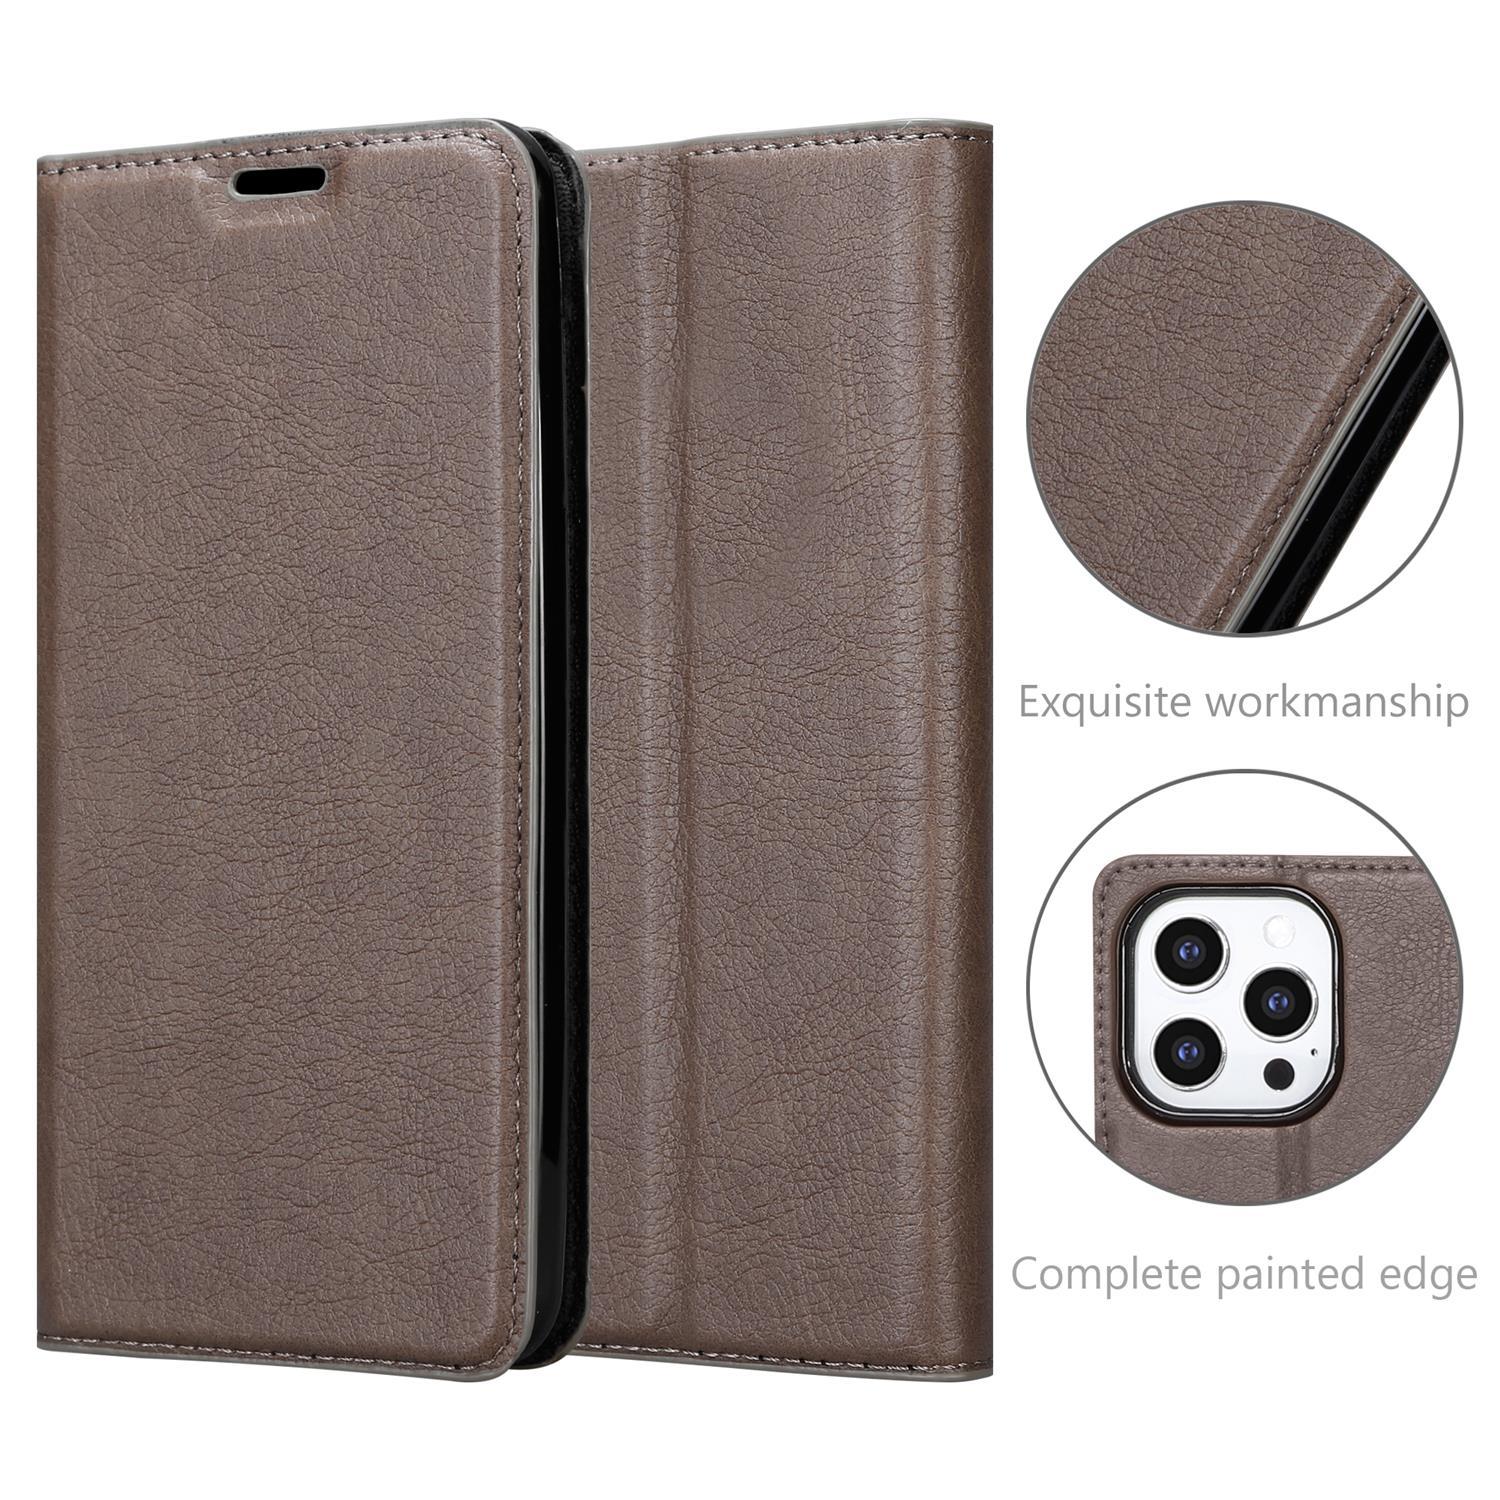 13 PRO CADORABO BRAUN iPhone Bookcover, Magnet, KAFFEE Hülle Invisible MAX, Book Apple,